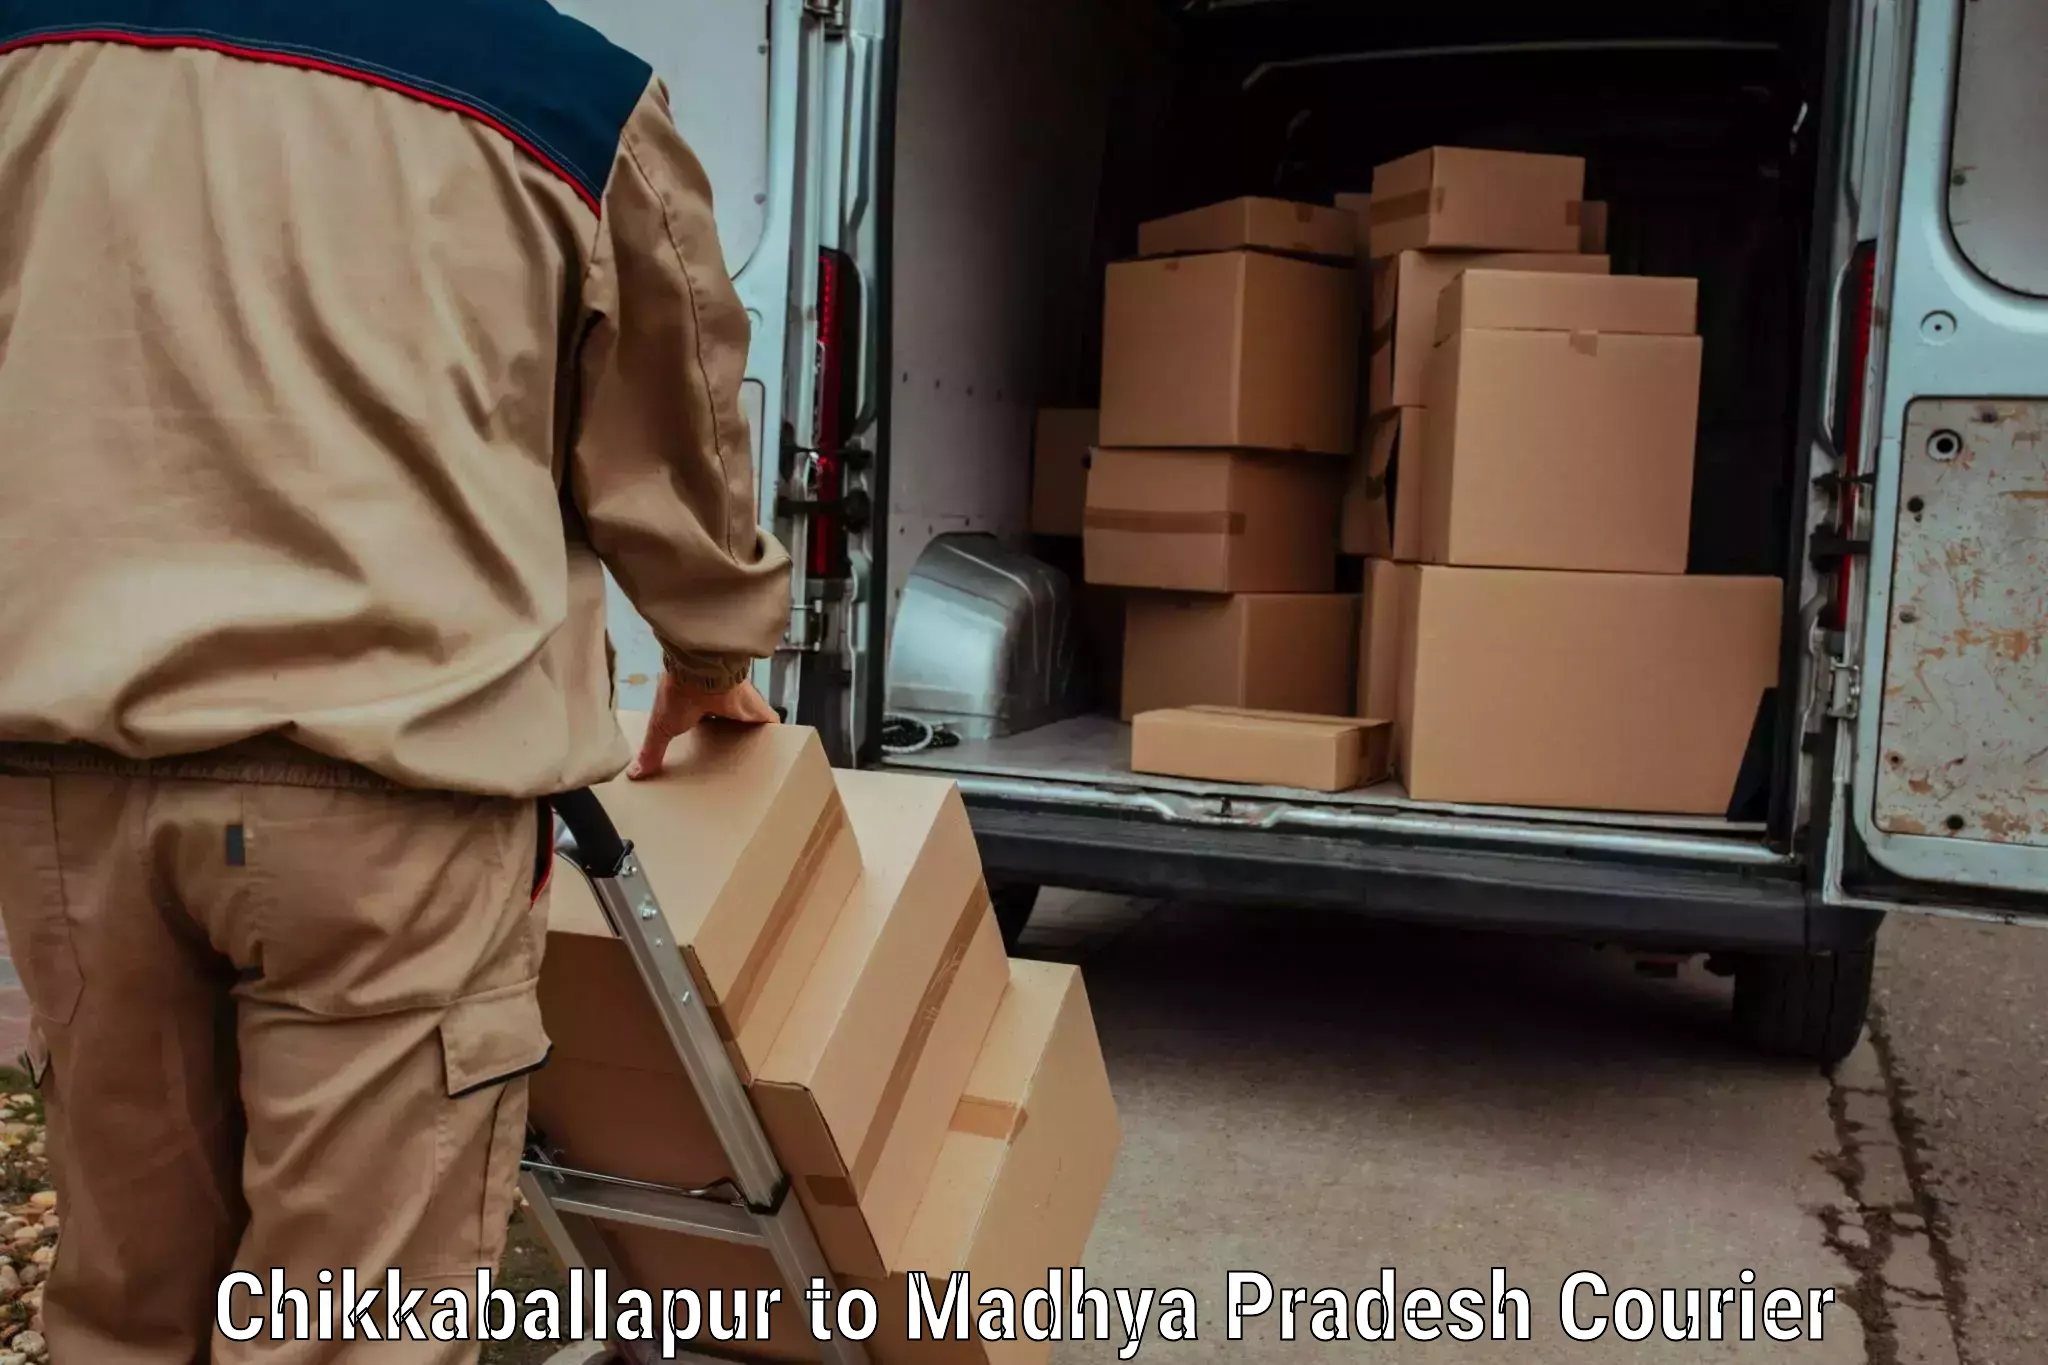 High-priority parcel service Chikkaballapur to Bhopal